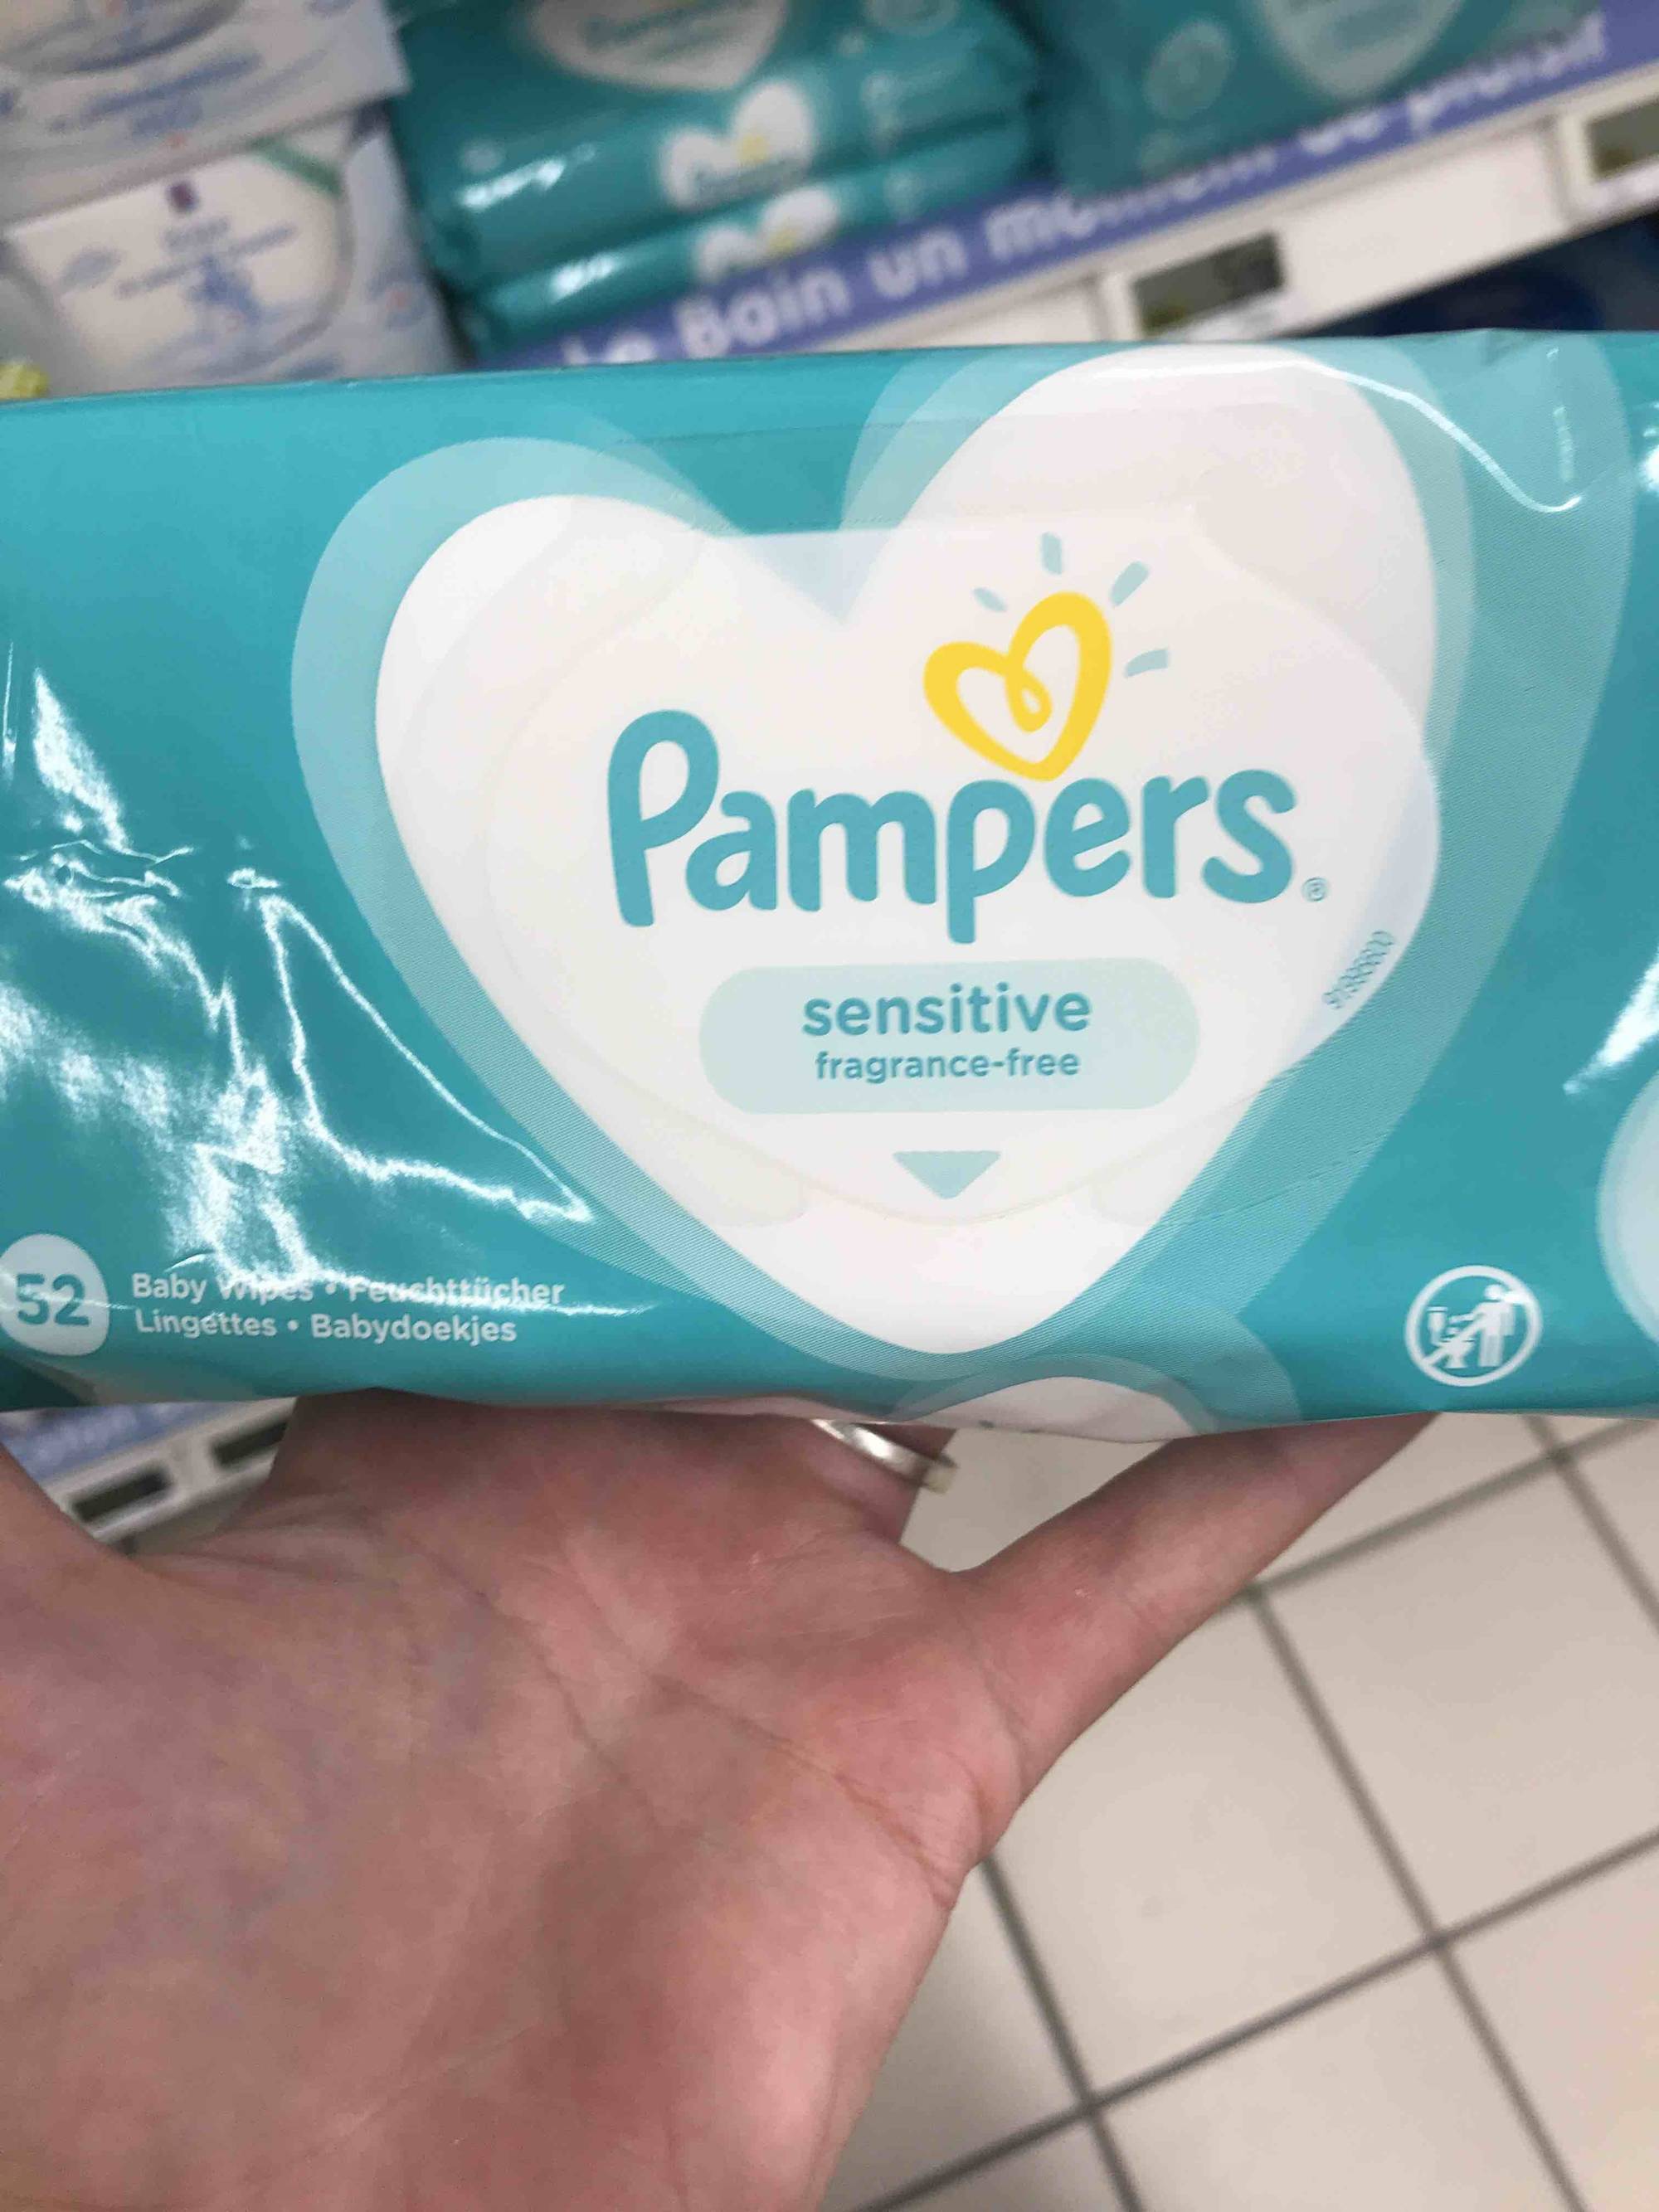 PAMPERS - Sensitive - Baby wipes